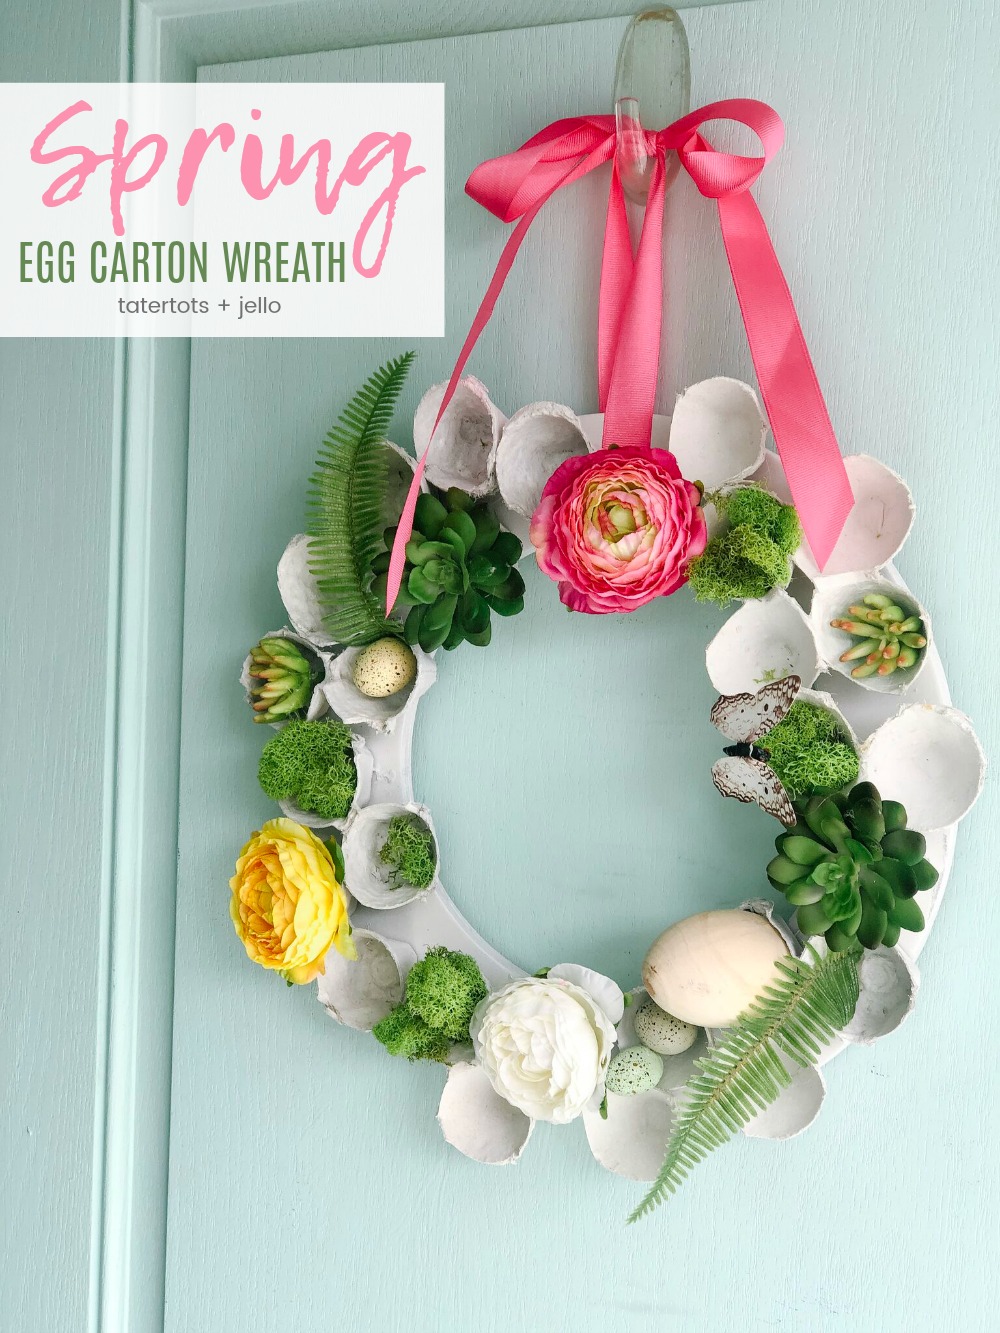 upcycle egg cartons and make a wreath for Spring!